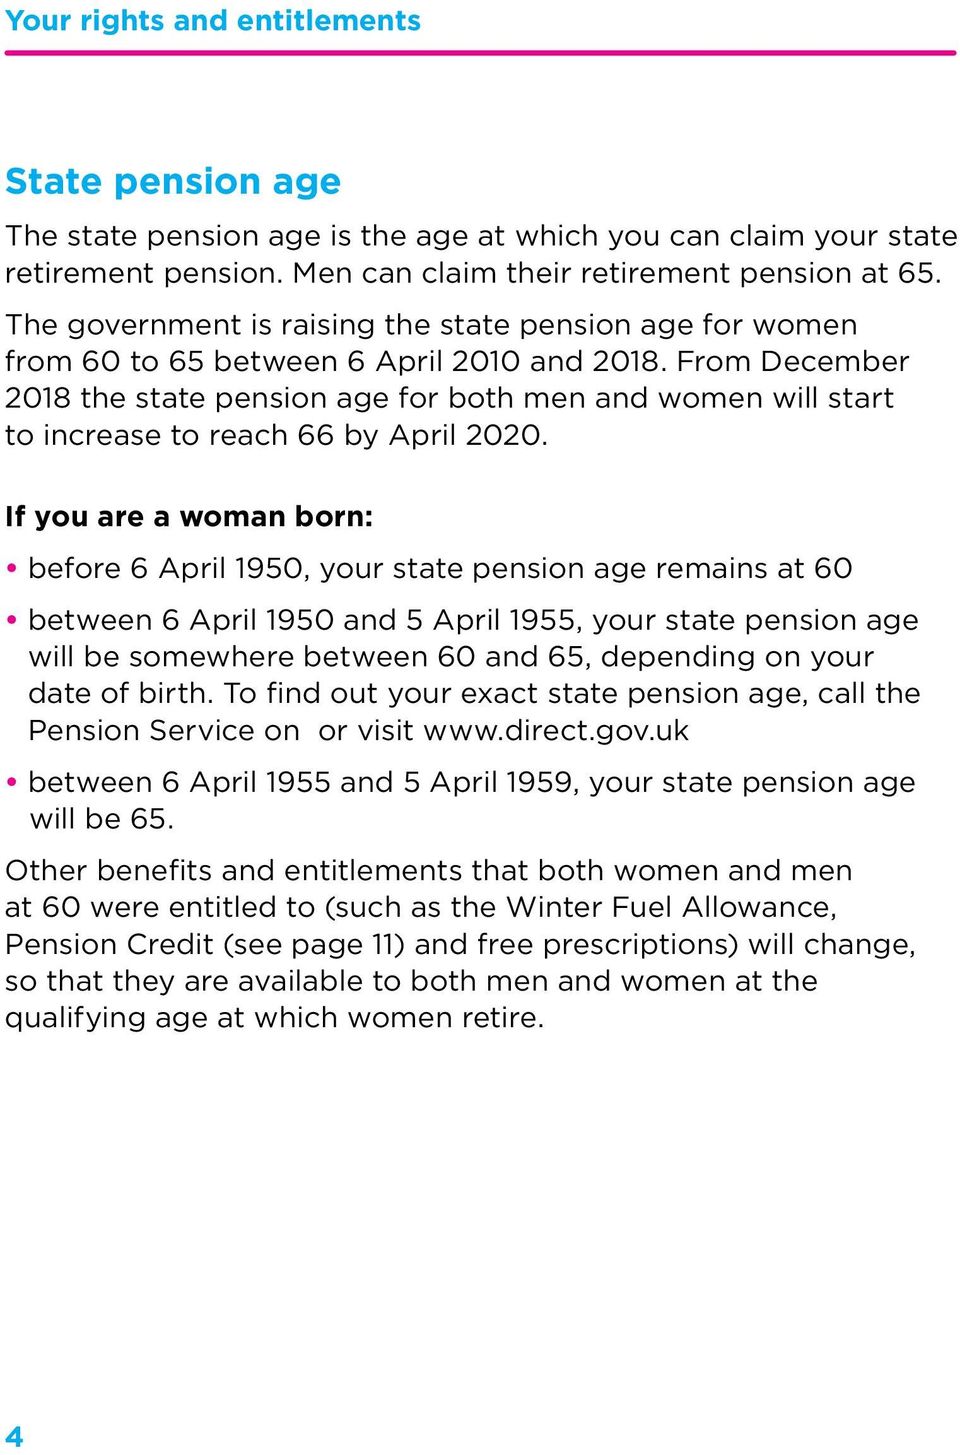 From December 2018 the state pension age for both men and women will start to increase to reach 66 by April 2020.